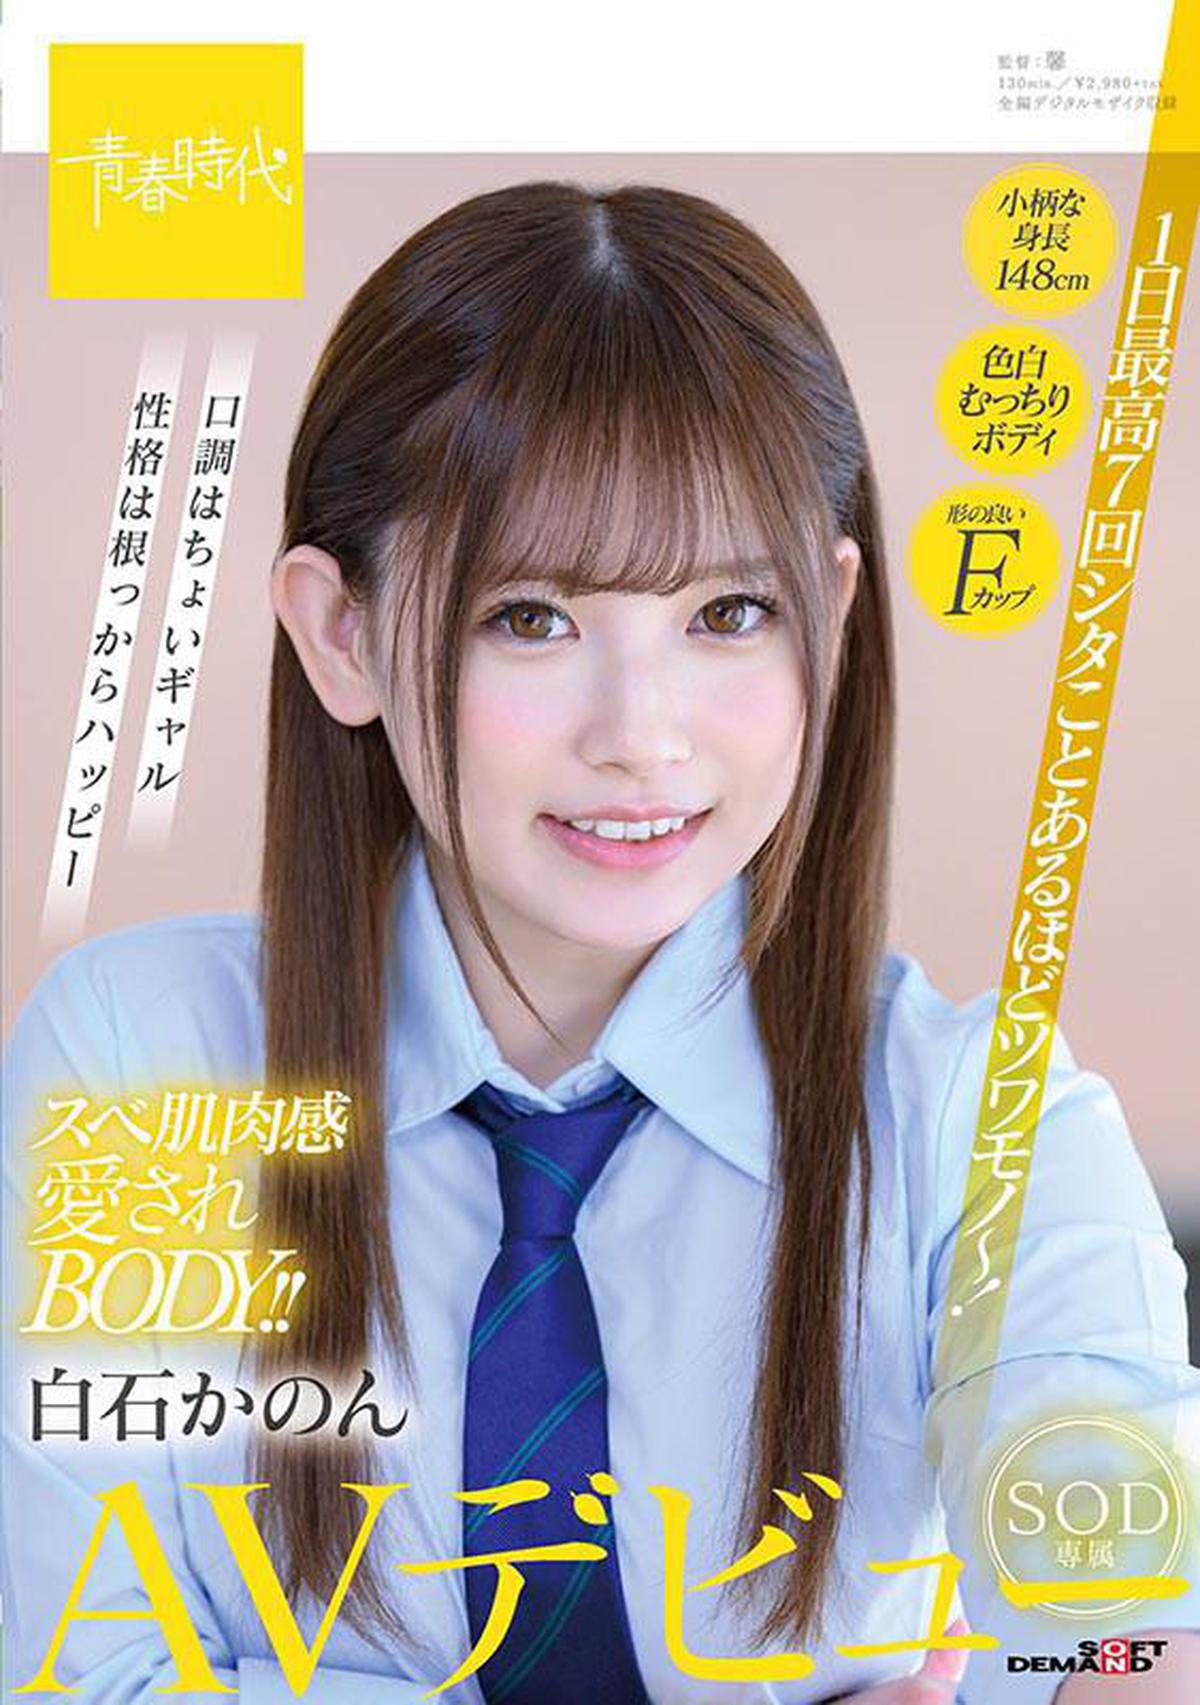 6000Kbps FHD SDAB-164 Up to 7 Times A Day Smooth skin flesh loved BODY! !! Kanon Shiraishi SOD Exclusive AV Debut